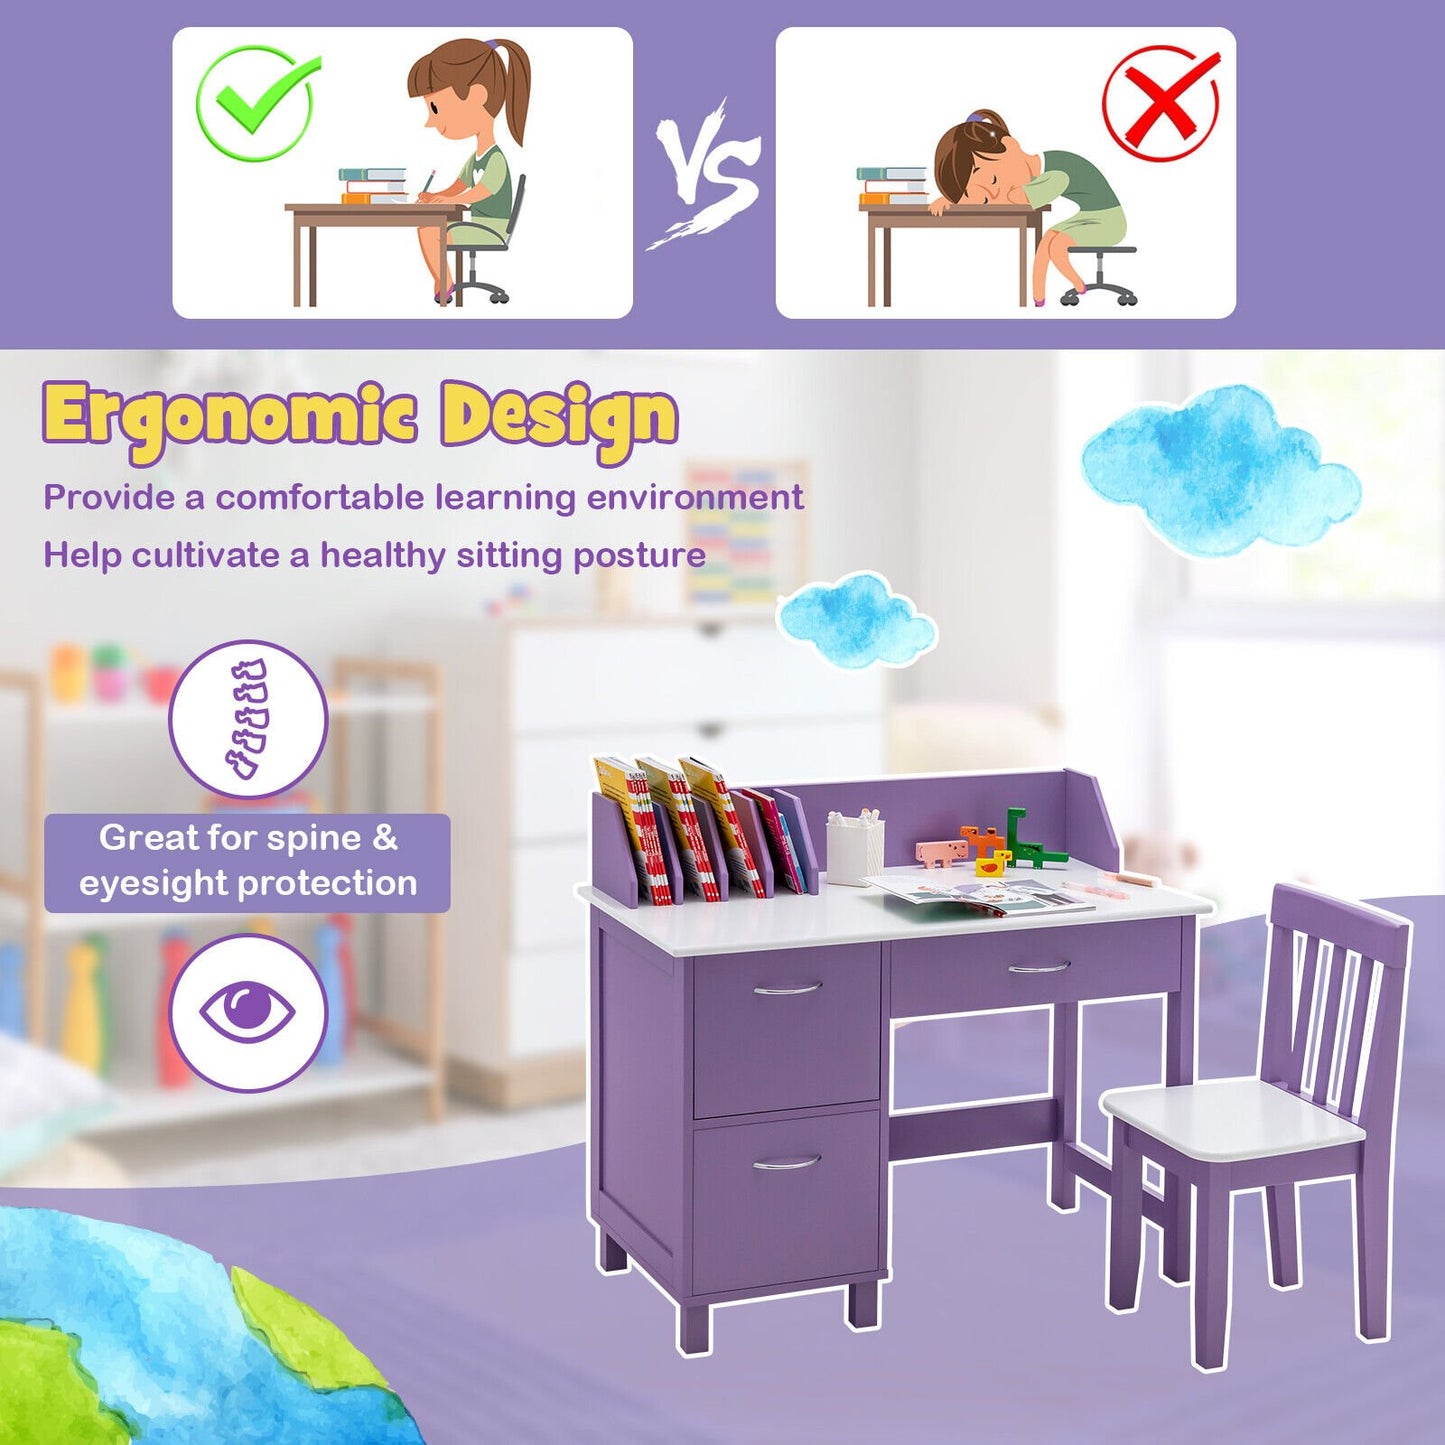 Kids Wooden Writing Furniture Set with Drawer and Storage Cabinet, Purple - Gallery Canada